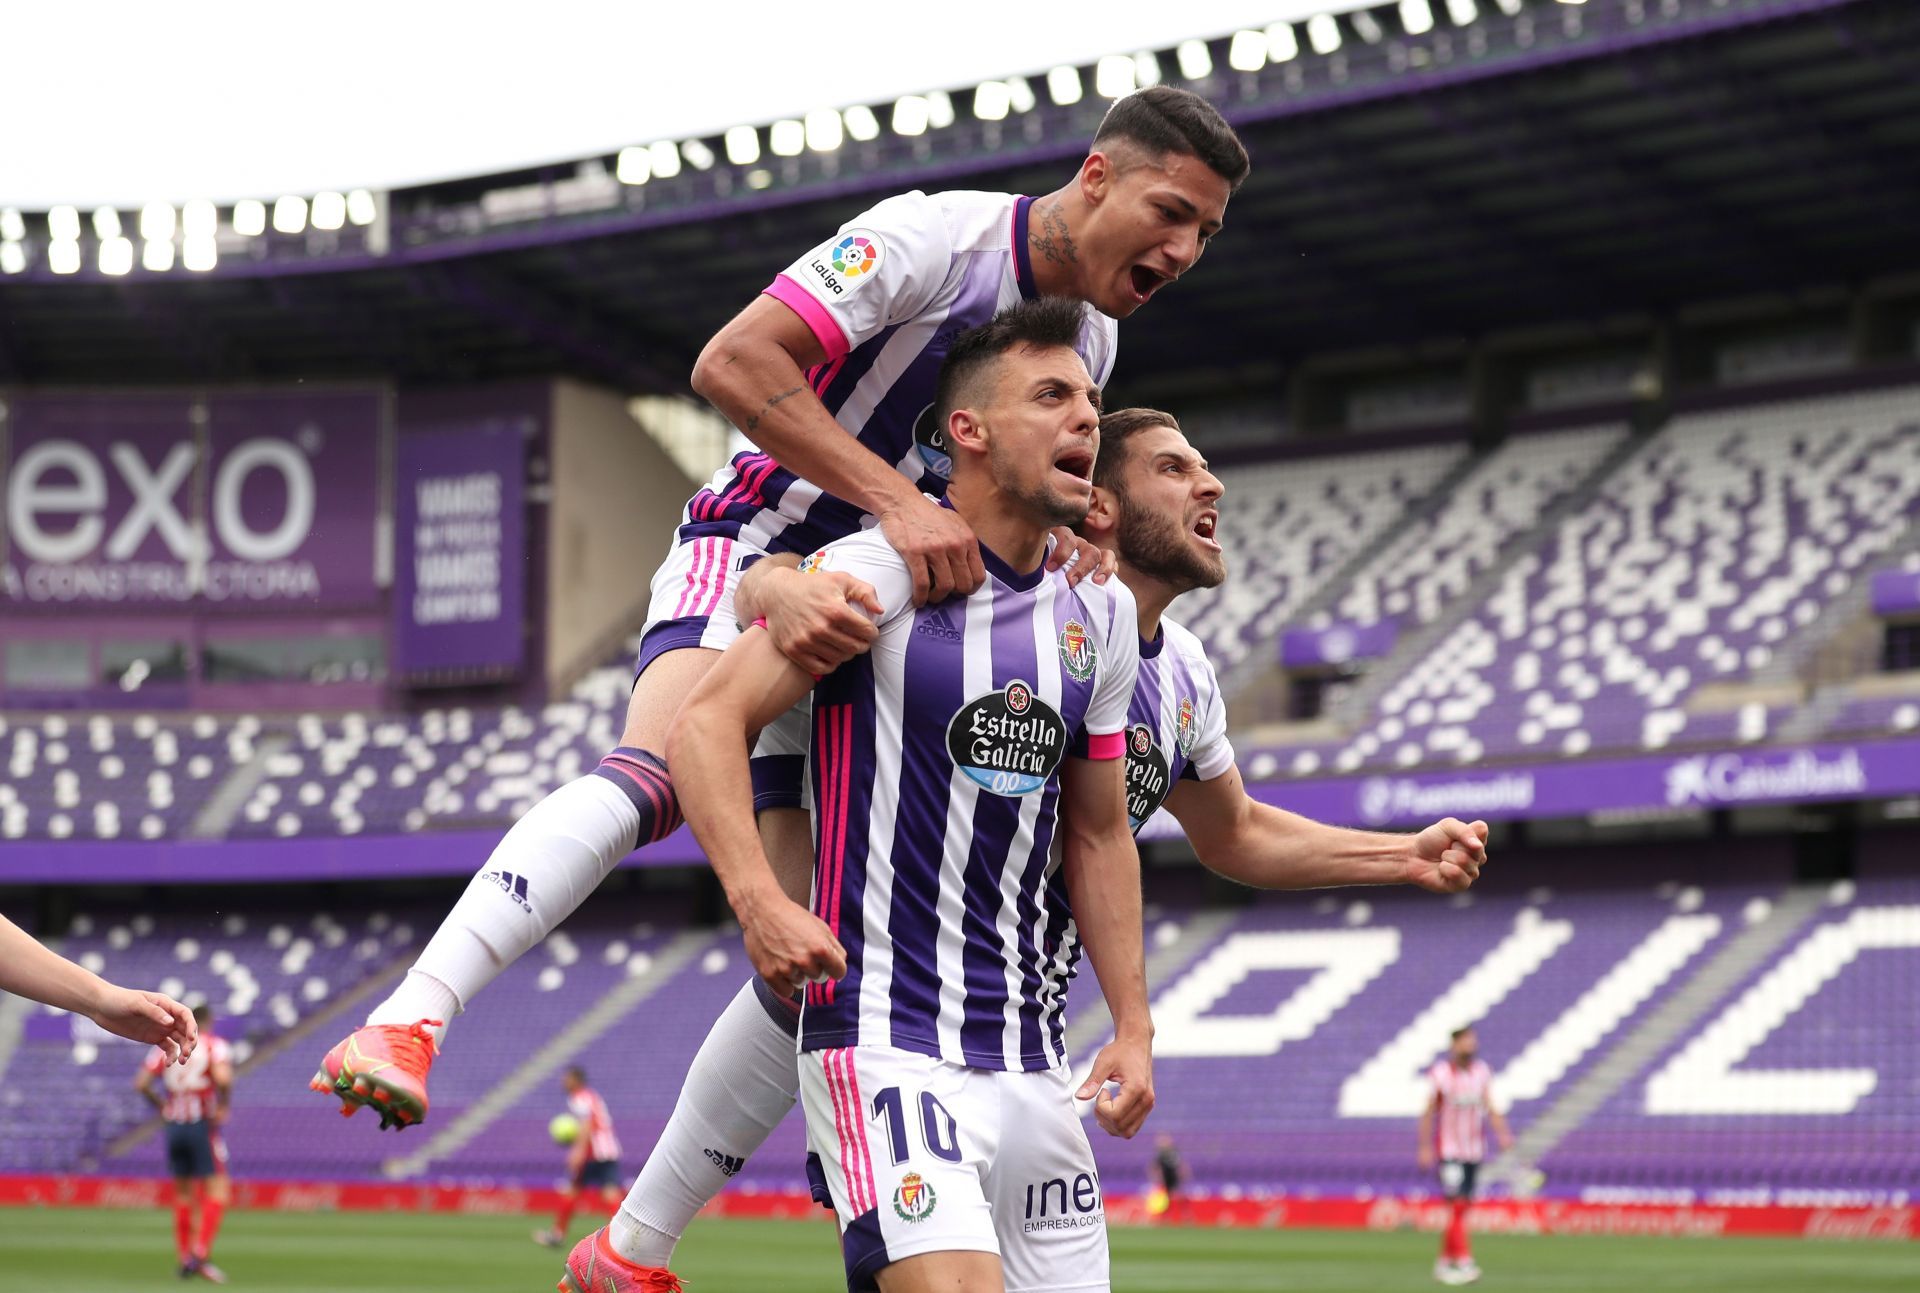 Real Valladolid will be aiming to win the game